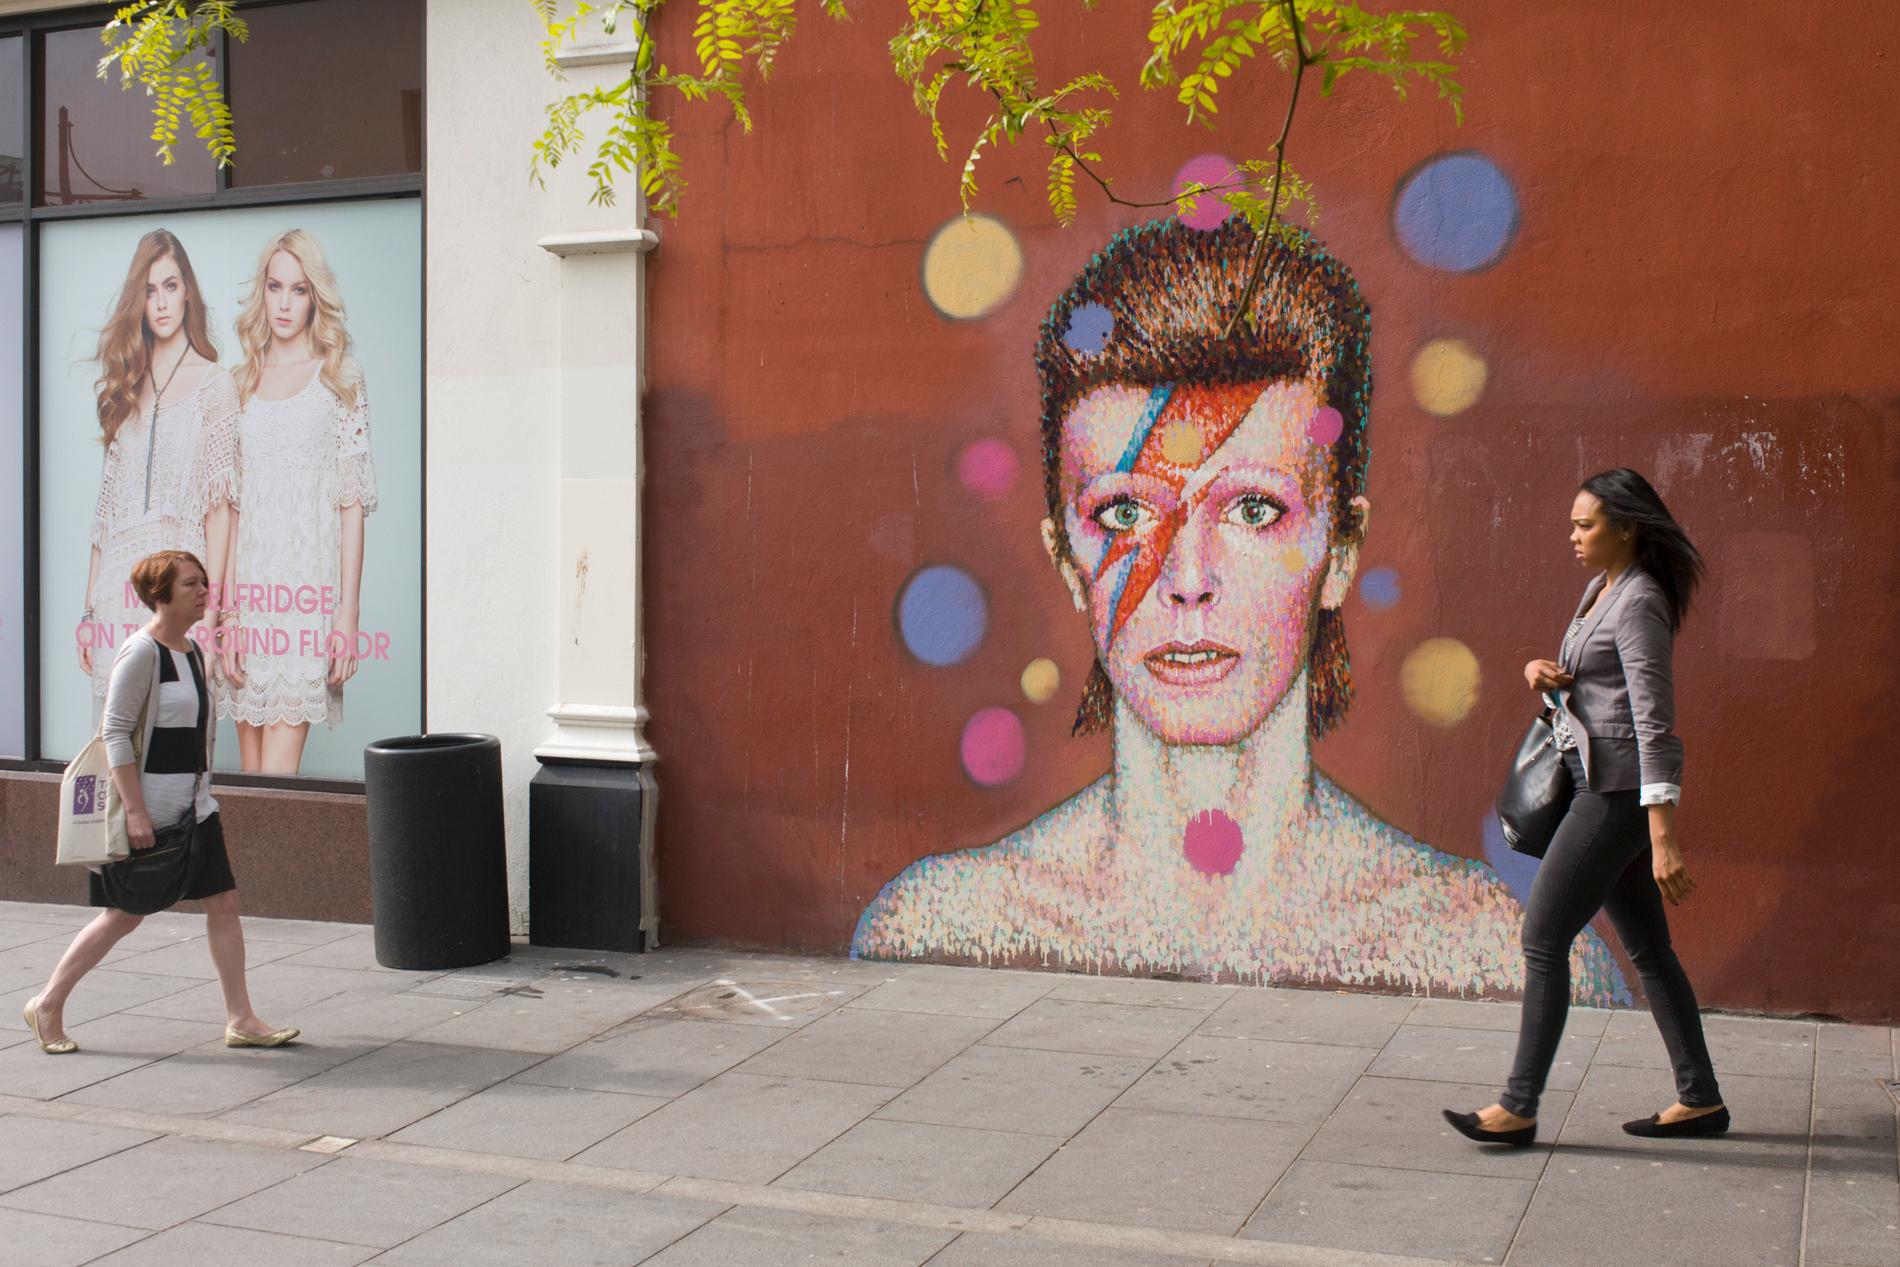 David Bowie på en muralmålning i Brixton, södra London. The Bowie face is sourced (by an unknown artist) from the cover of his 1973 album Aladdin Sane at the height of his 1970s fame. The pop icon lived at 40 Stansfield Road, Brixton, from his birth in 1947 until 1953. This cover appeared in Rolling Stone’s list of the 500 greatest albums of all time, making #277.